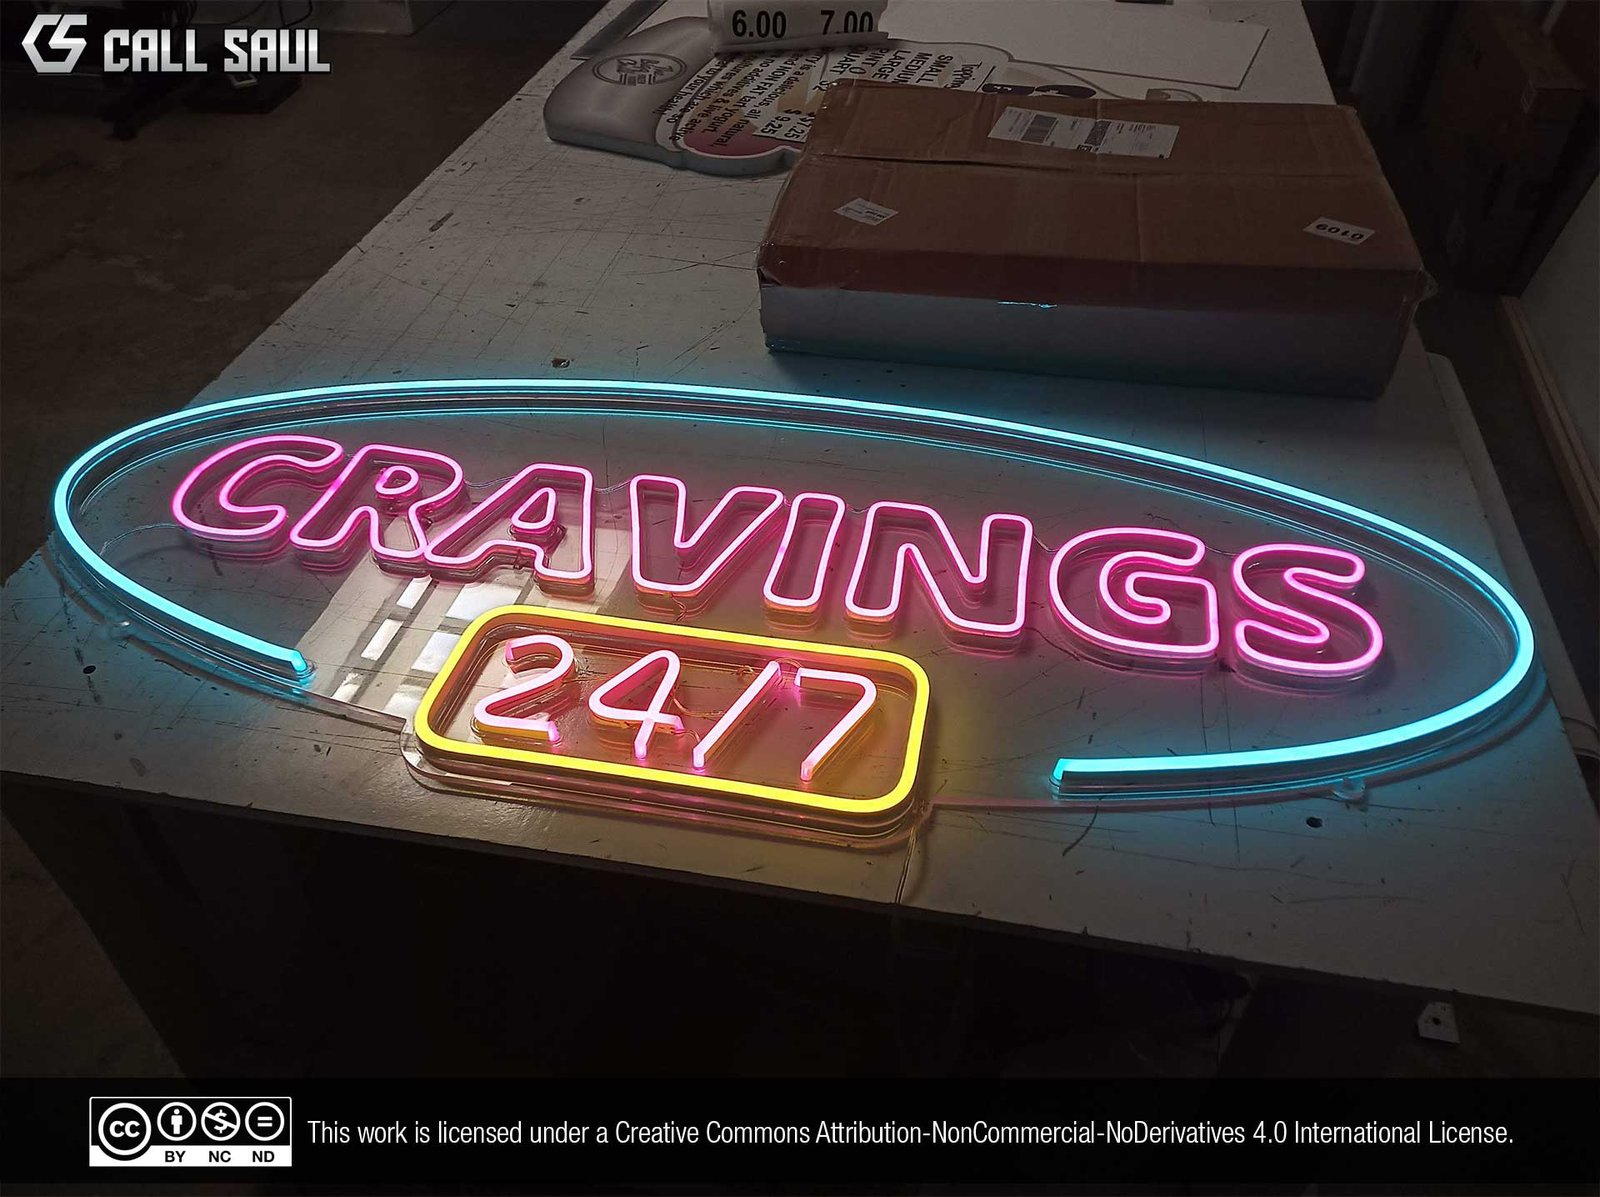 Cravings 24/7 Light Blue, Pink and Golden Yellow LED Neon Sign